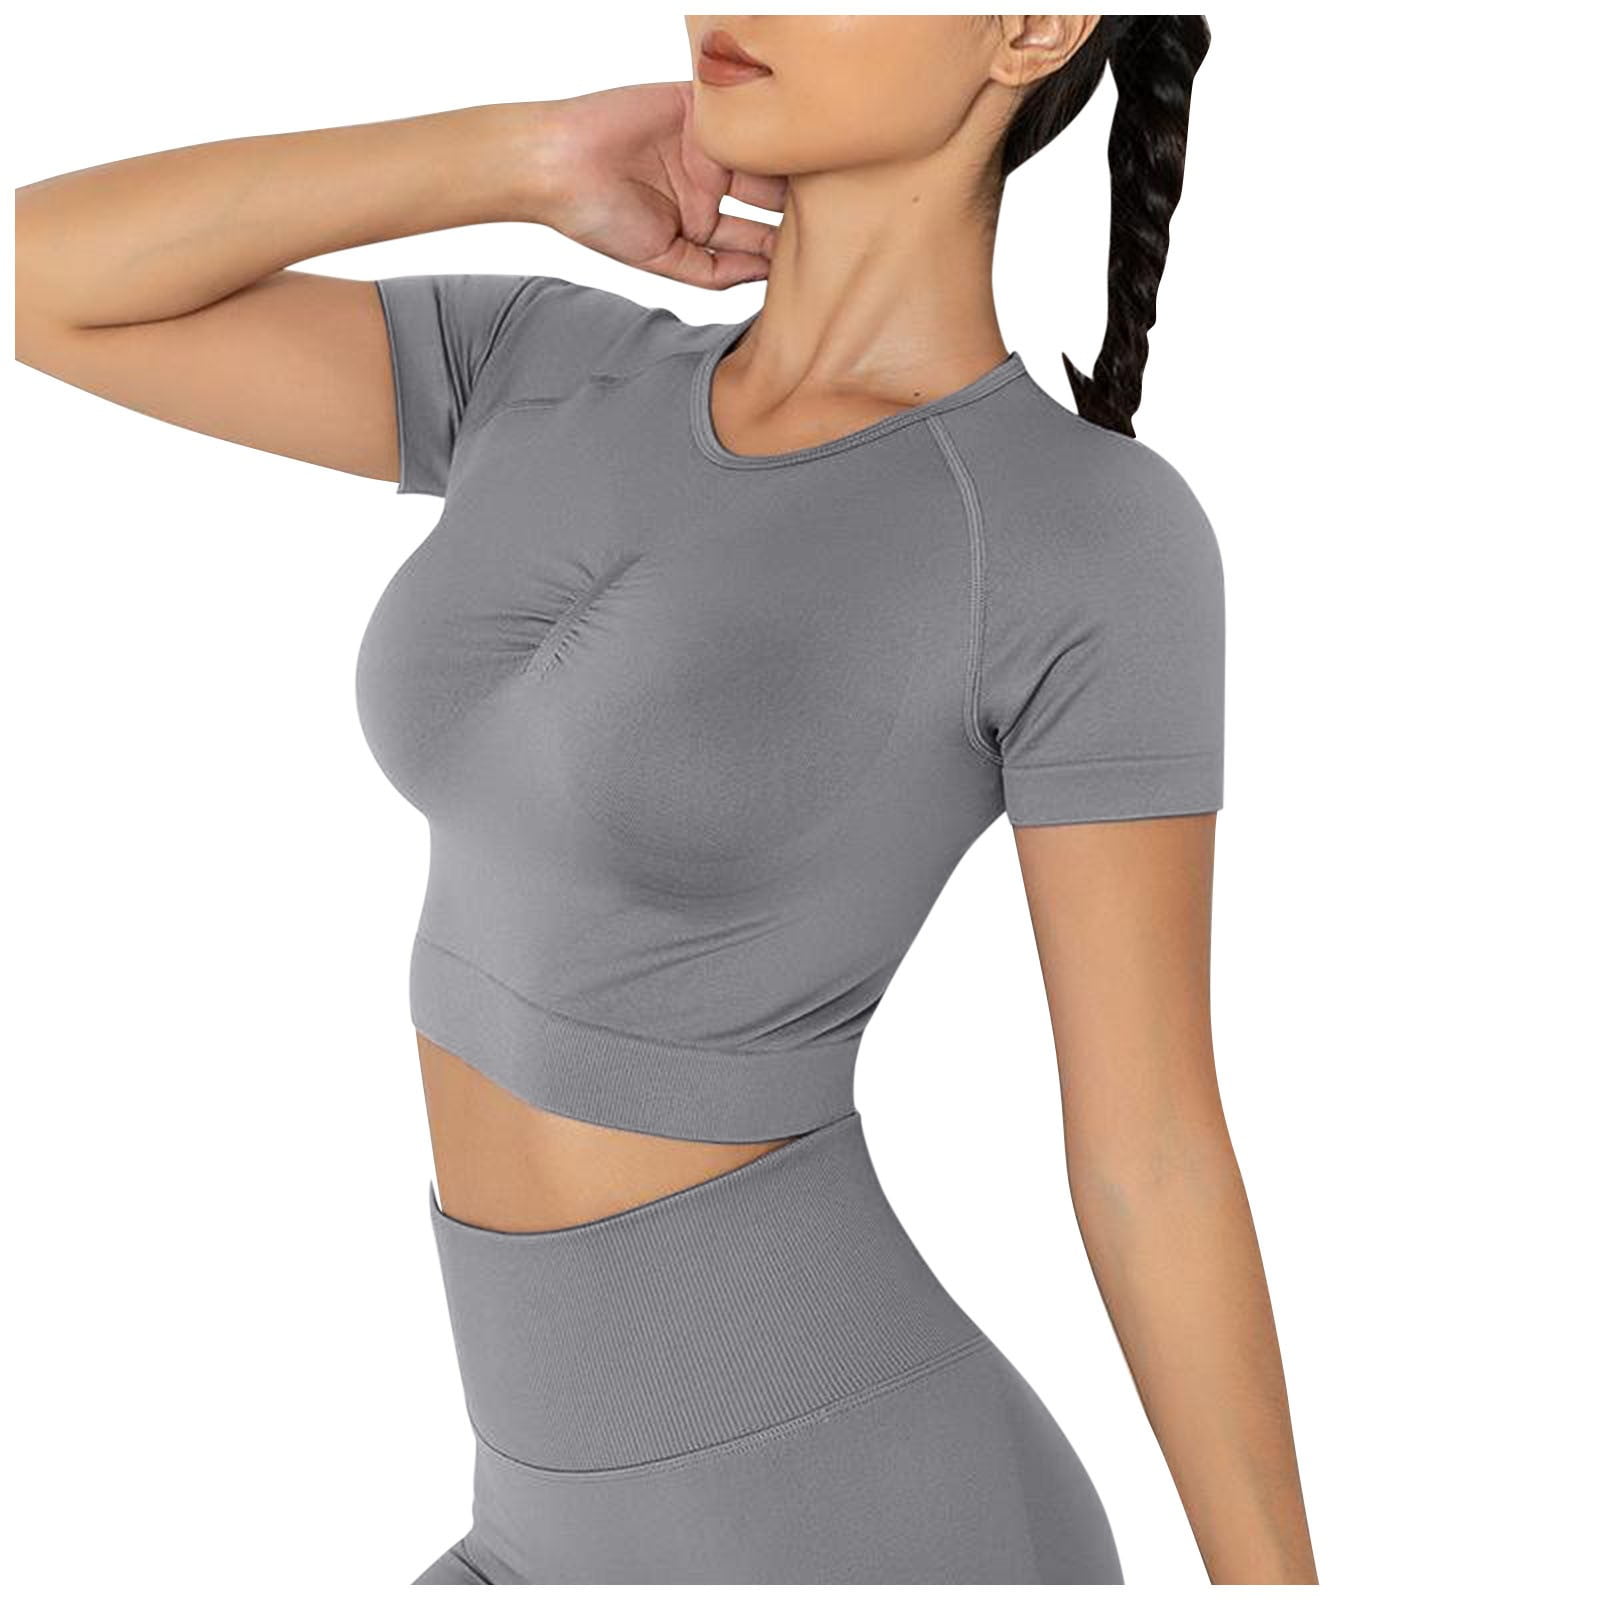 Women's Gym Set With Short Sleeves Grey Seamless Activewear